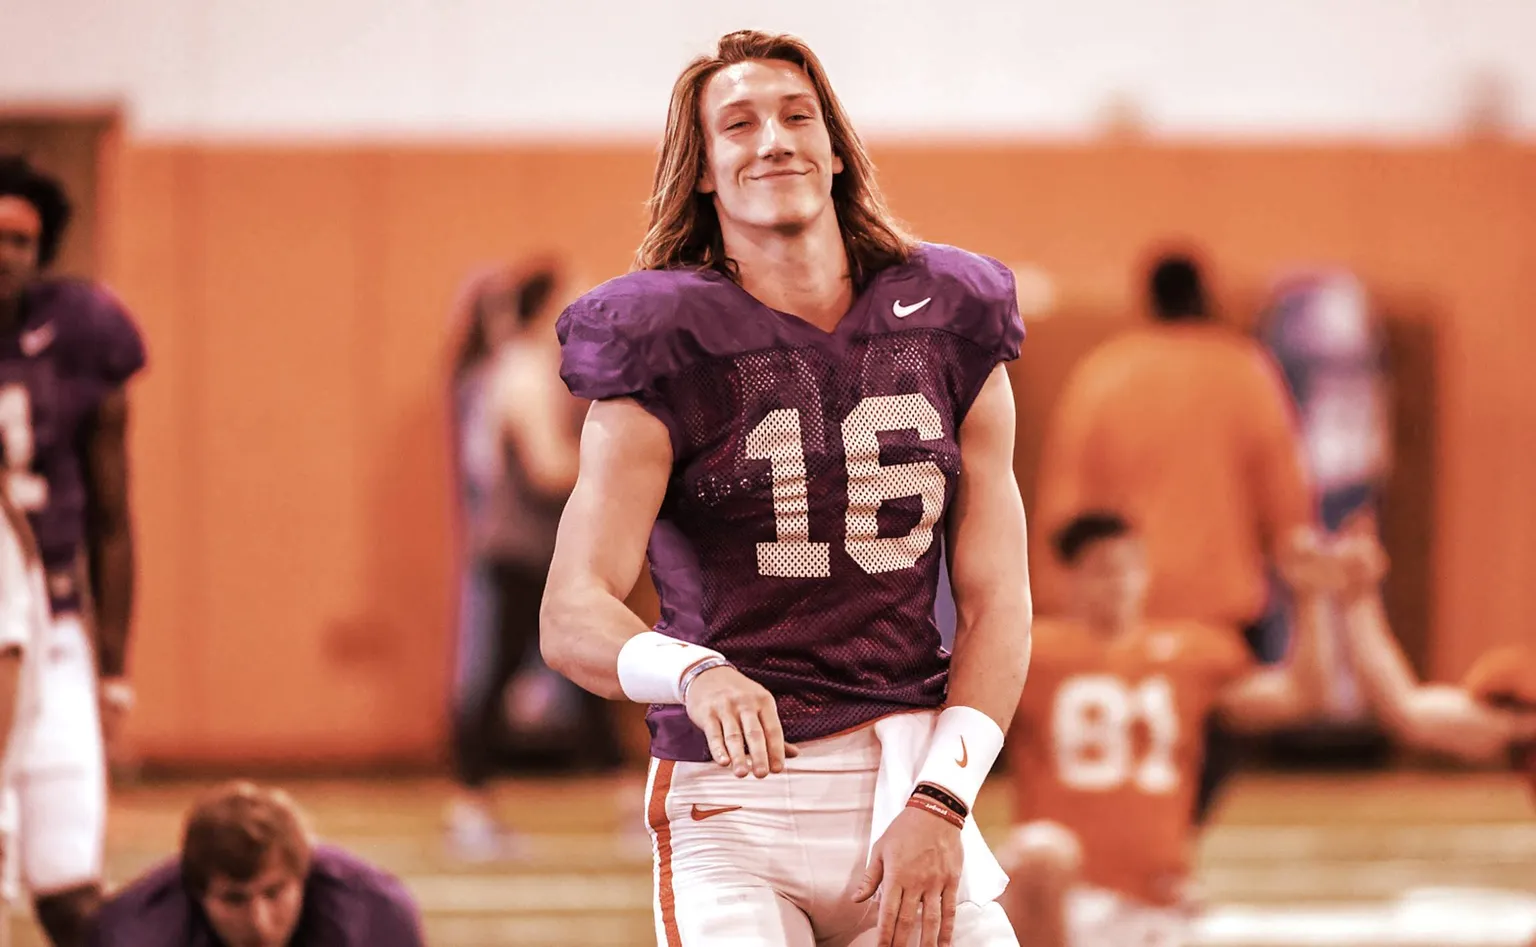 Former Clemson University quarterback Trevor Lawrence is the top prospect in the 2021 NFL Draft. Image by TigerNet.com on Flickr (CC BY-NC-ND 2.0)